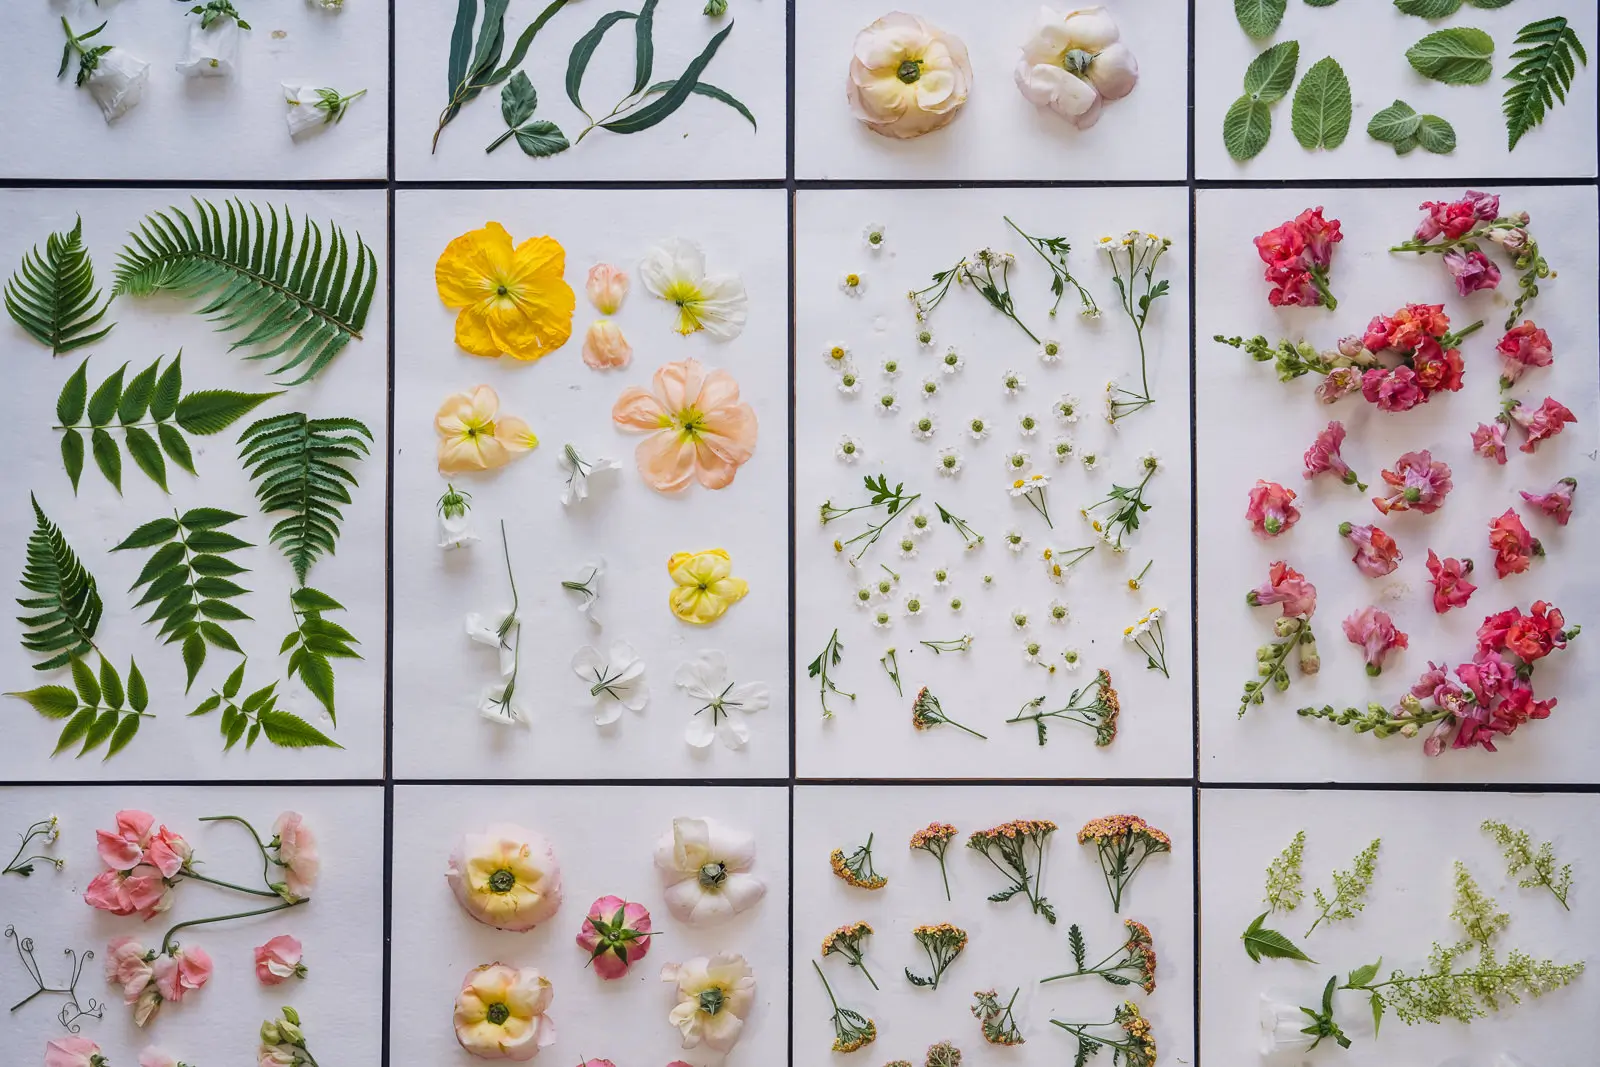 Colorful flowers spread out over paper and ready for pressed flower bouquet preservation